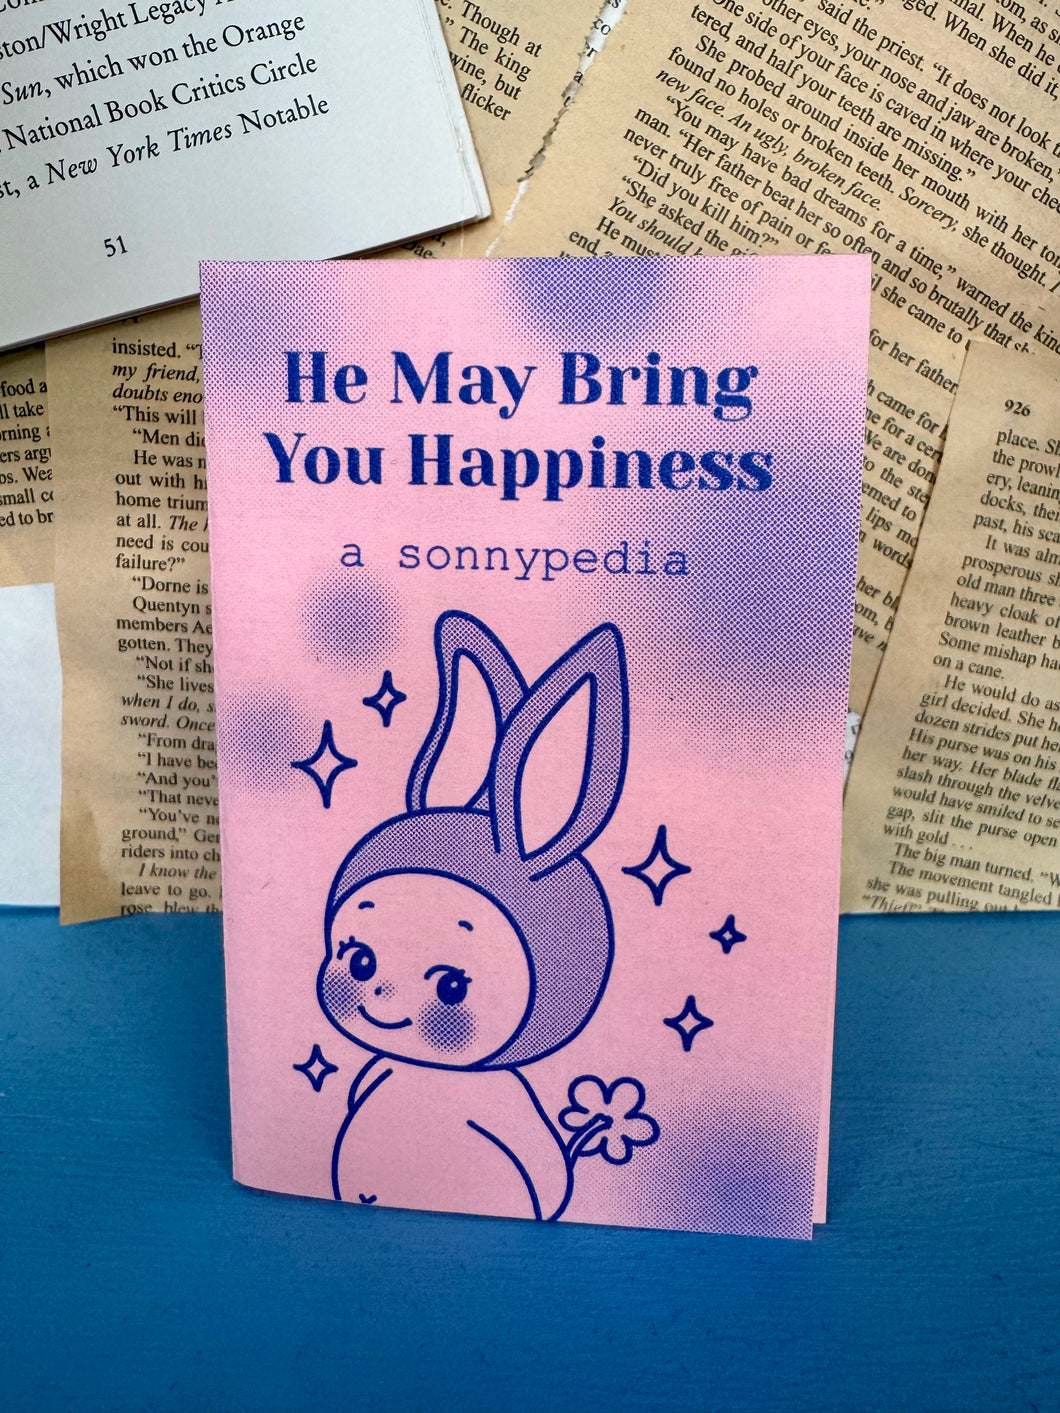 “He May Bring You Happiness” - a Sonnypedia Zine by Nana